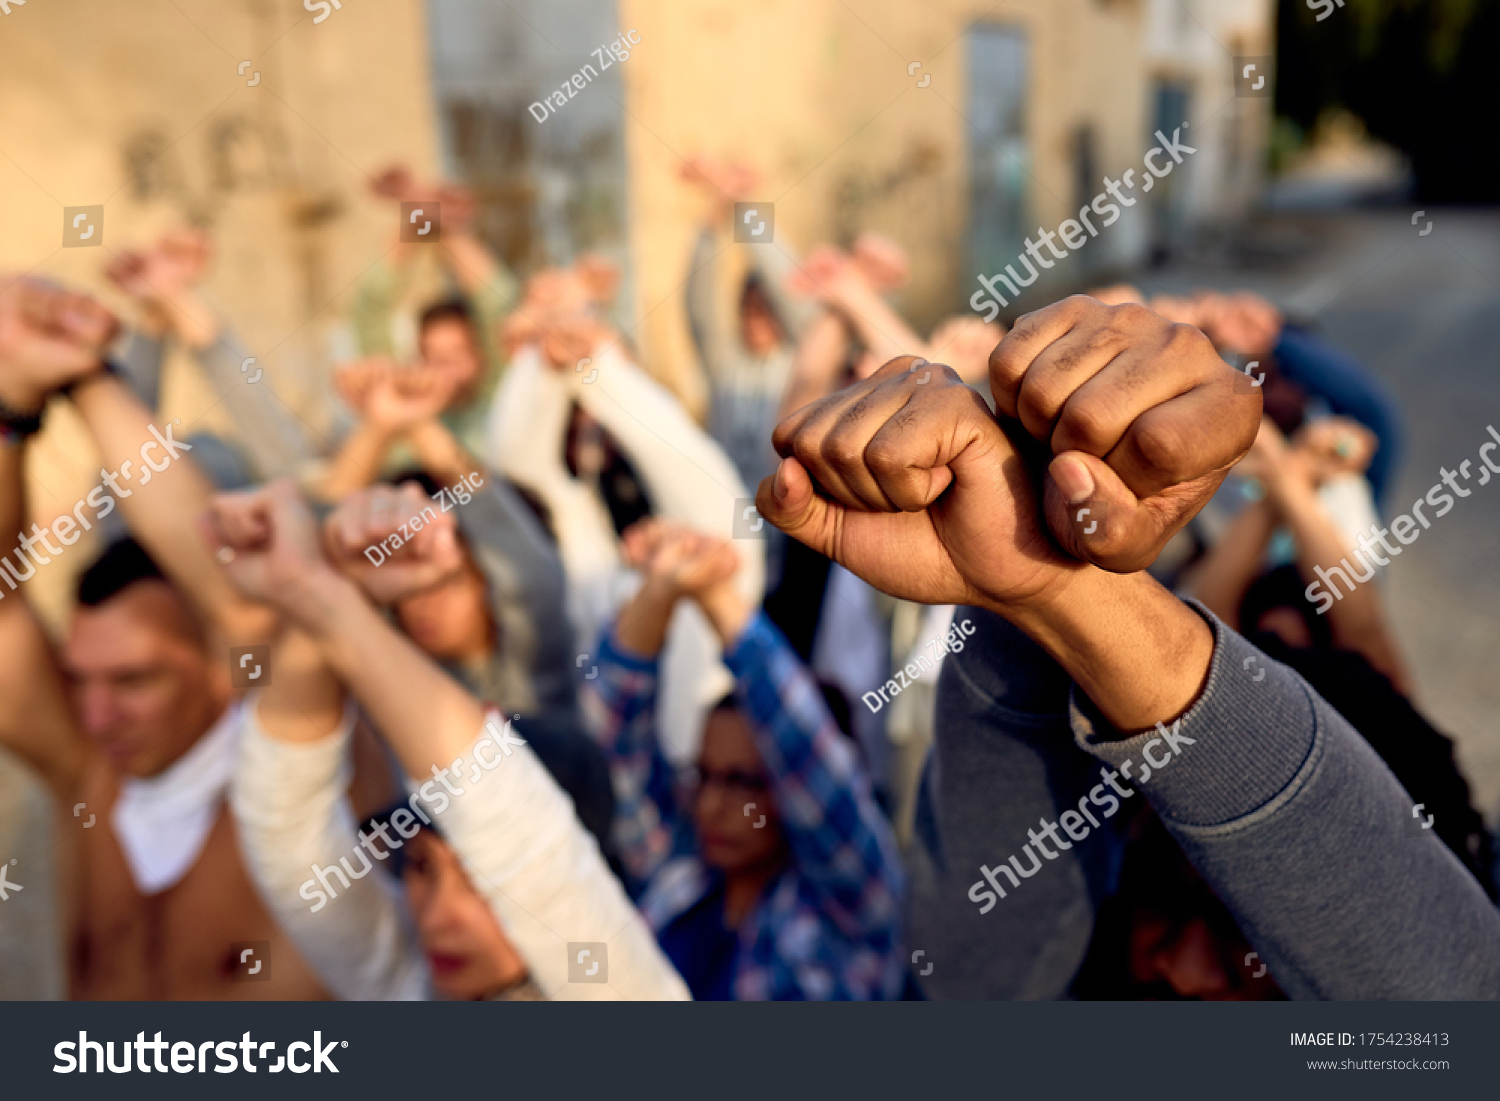 Close-up of large group of protesters with clenched fists above their heads on public demonstrations.  #1754238413